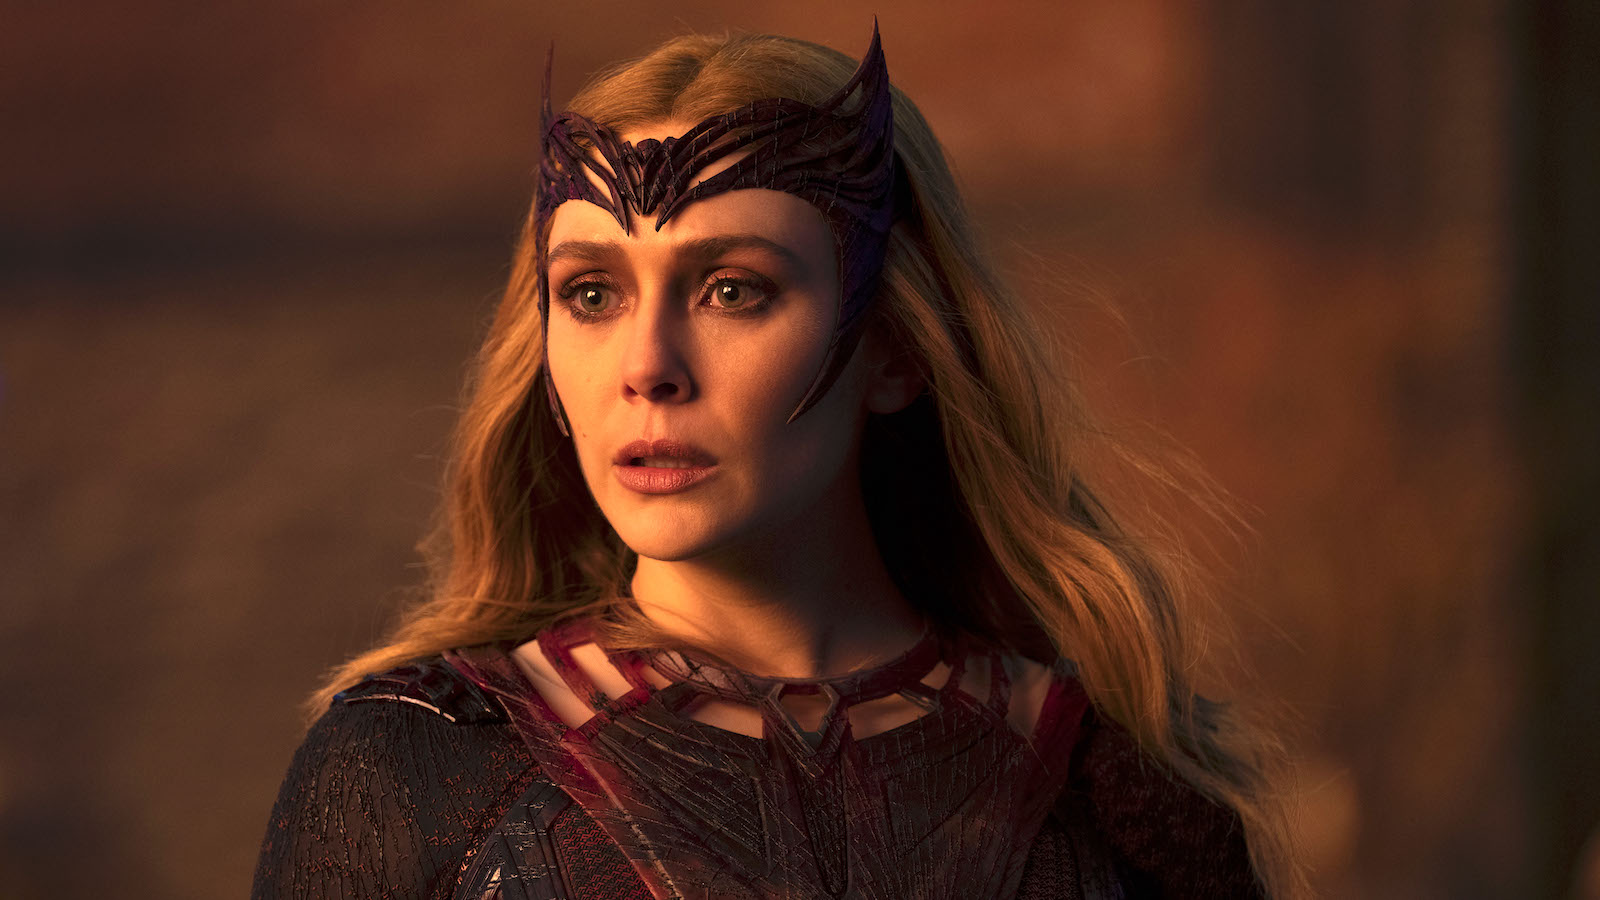 Elizabeth Olsen tests her knowledge of the history of Scarlet Witch